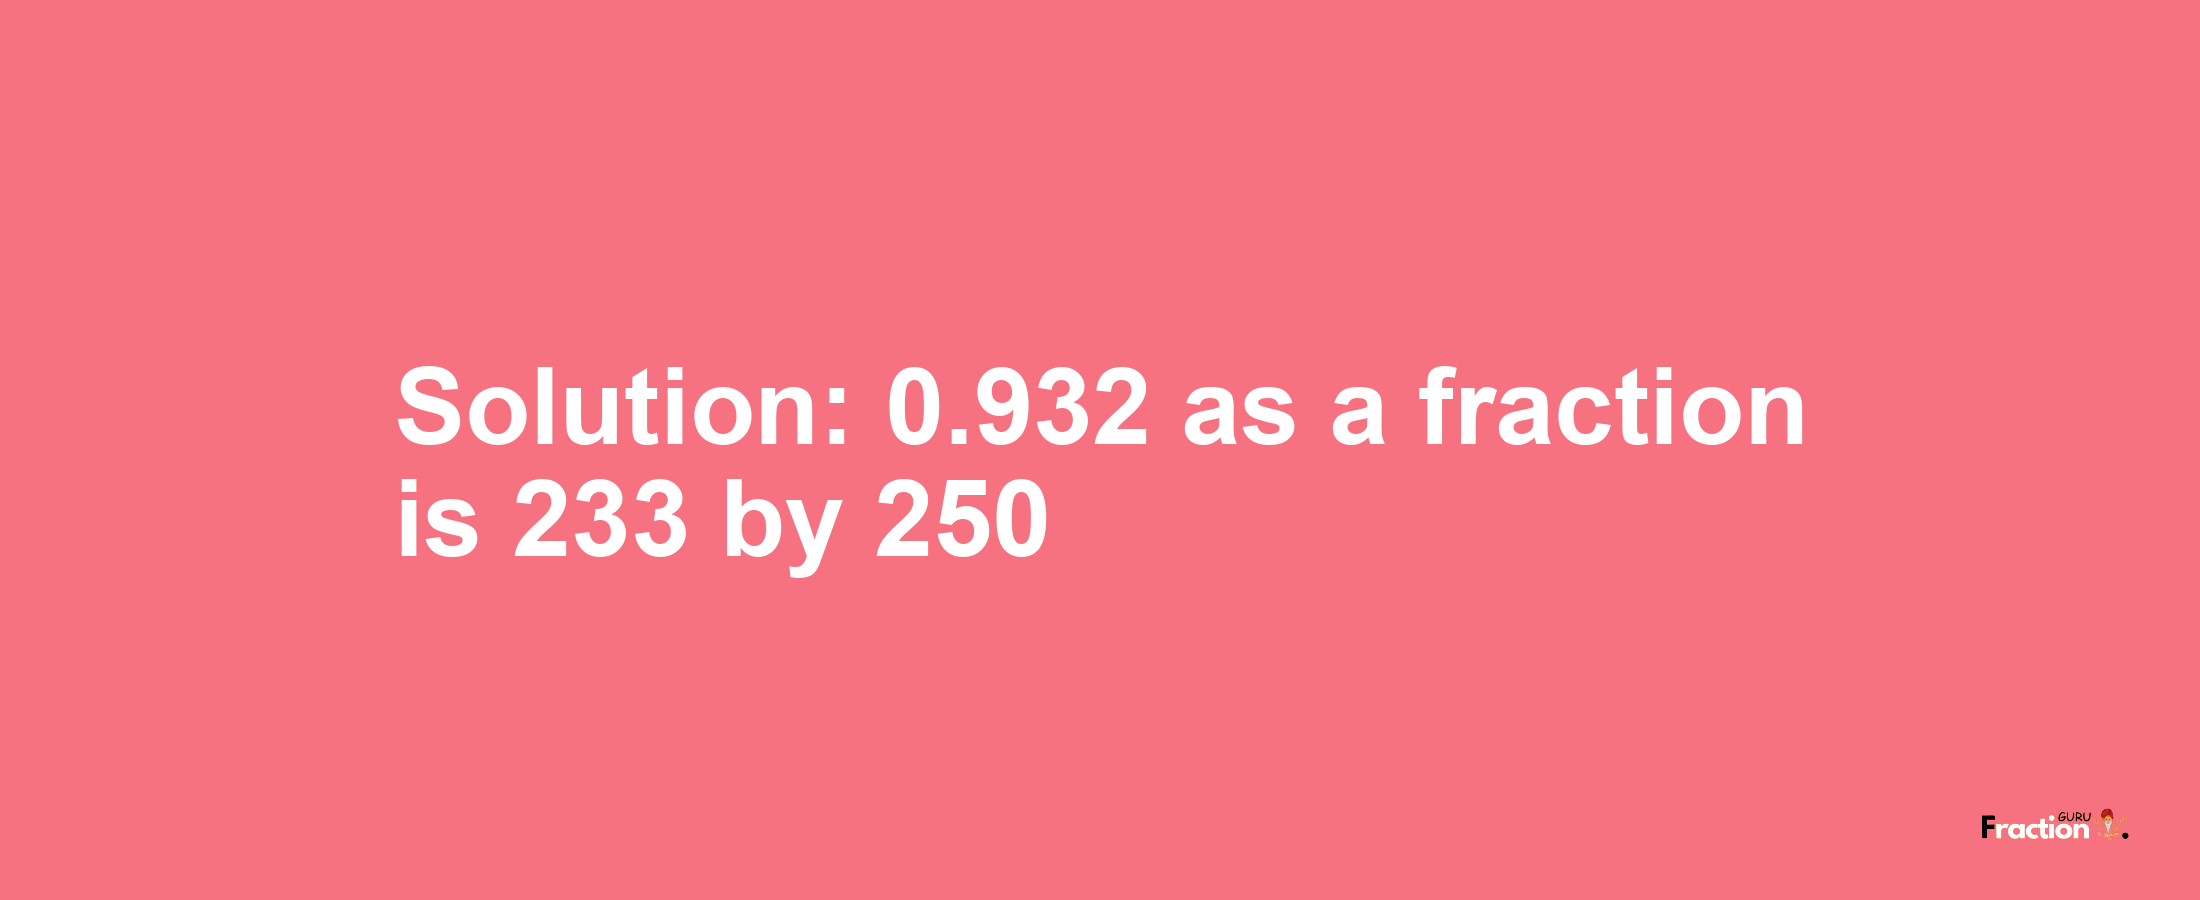 Solution:0.932 as a fraction is 233/250